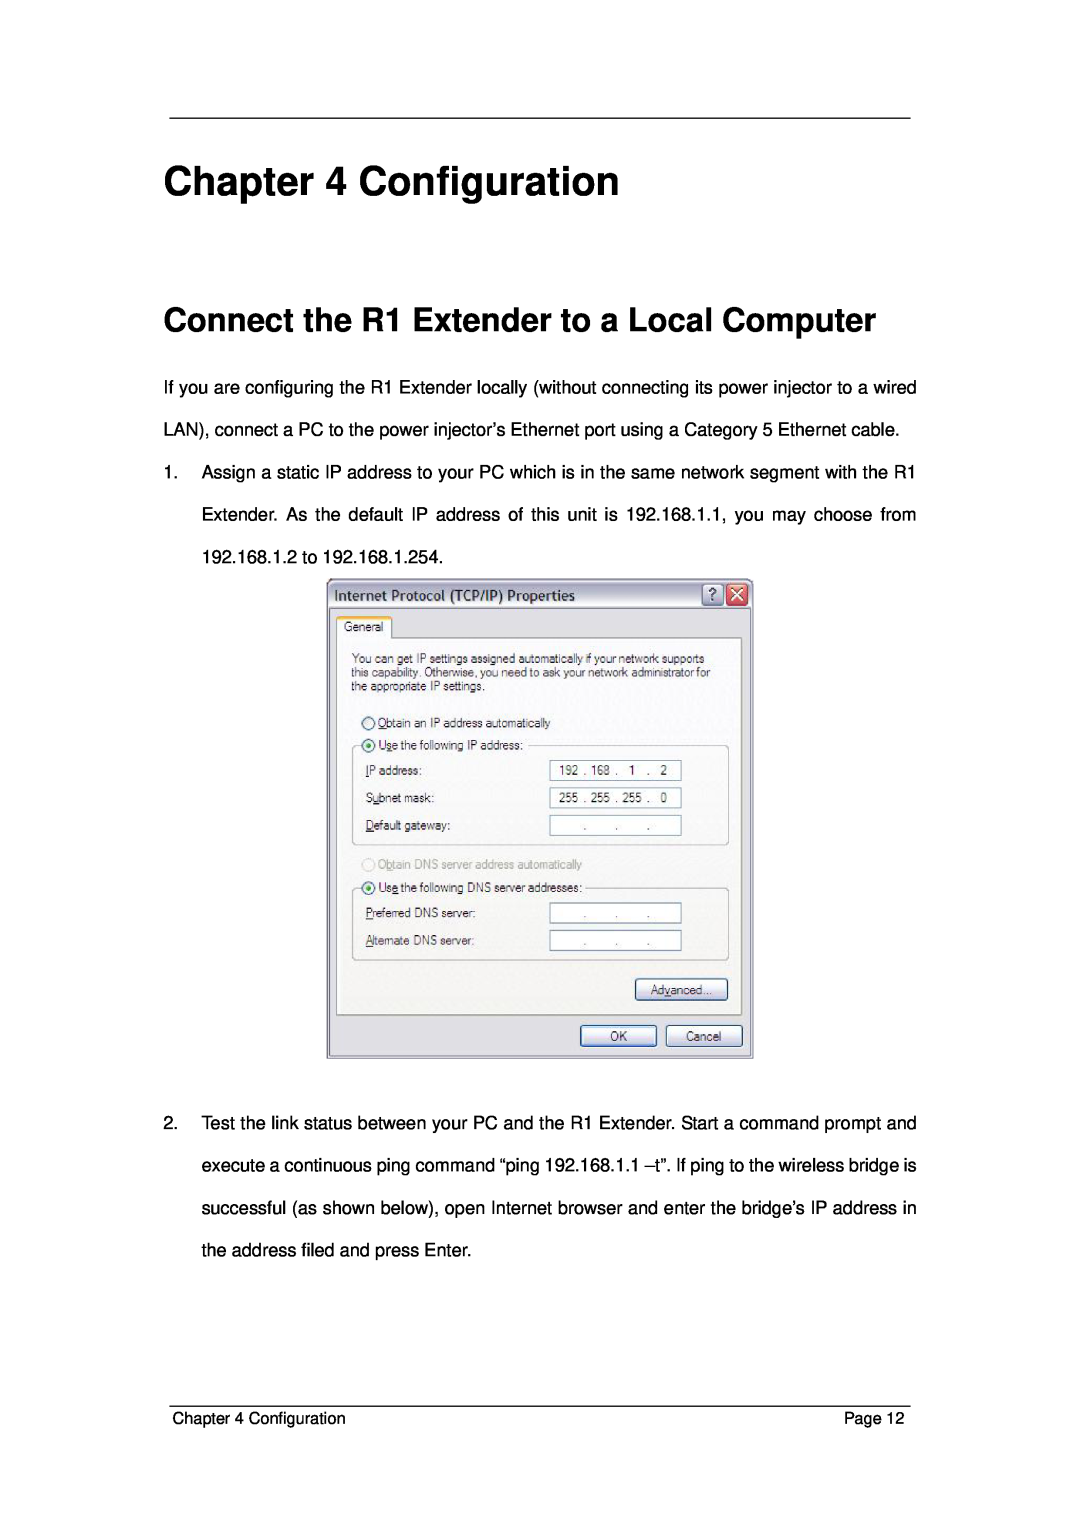 Z-Com manual Configuration, Connect the R1 Extender to a Local Computer 